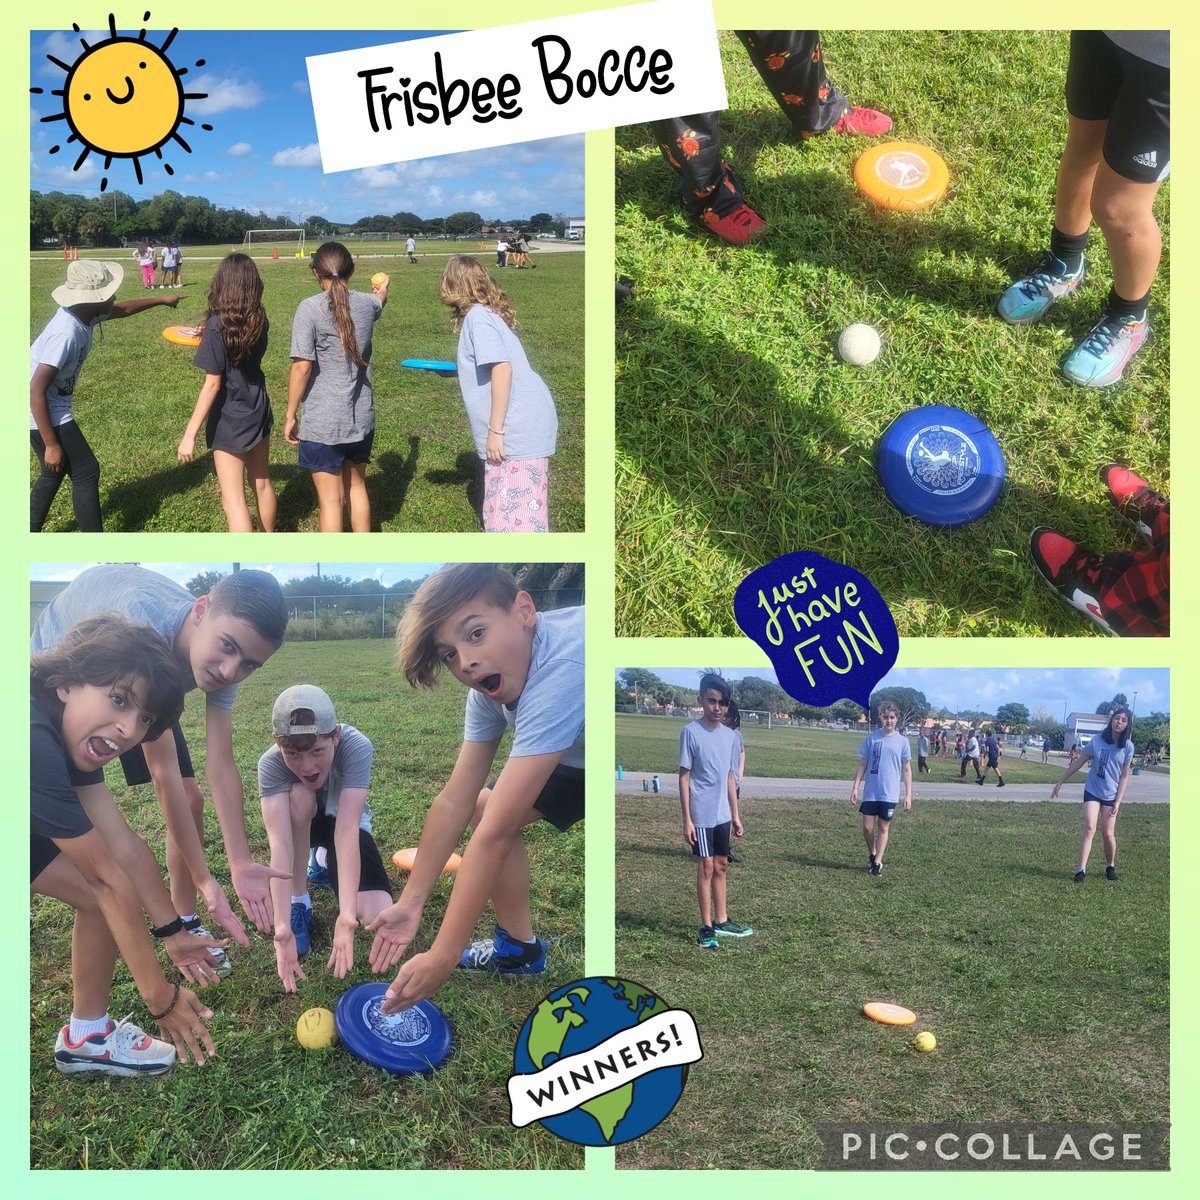 Is it suddenly very windy? Must be time for 6th grade to start Frisbee games! This week Ss worked on wrist snaps, throwing accuracy, and game strategy with Bocce Frisbee. @CMMSPrincipal @ericsternPE #cmmspe #activekids #discgames #PhysEd